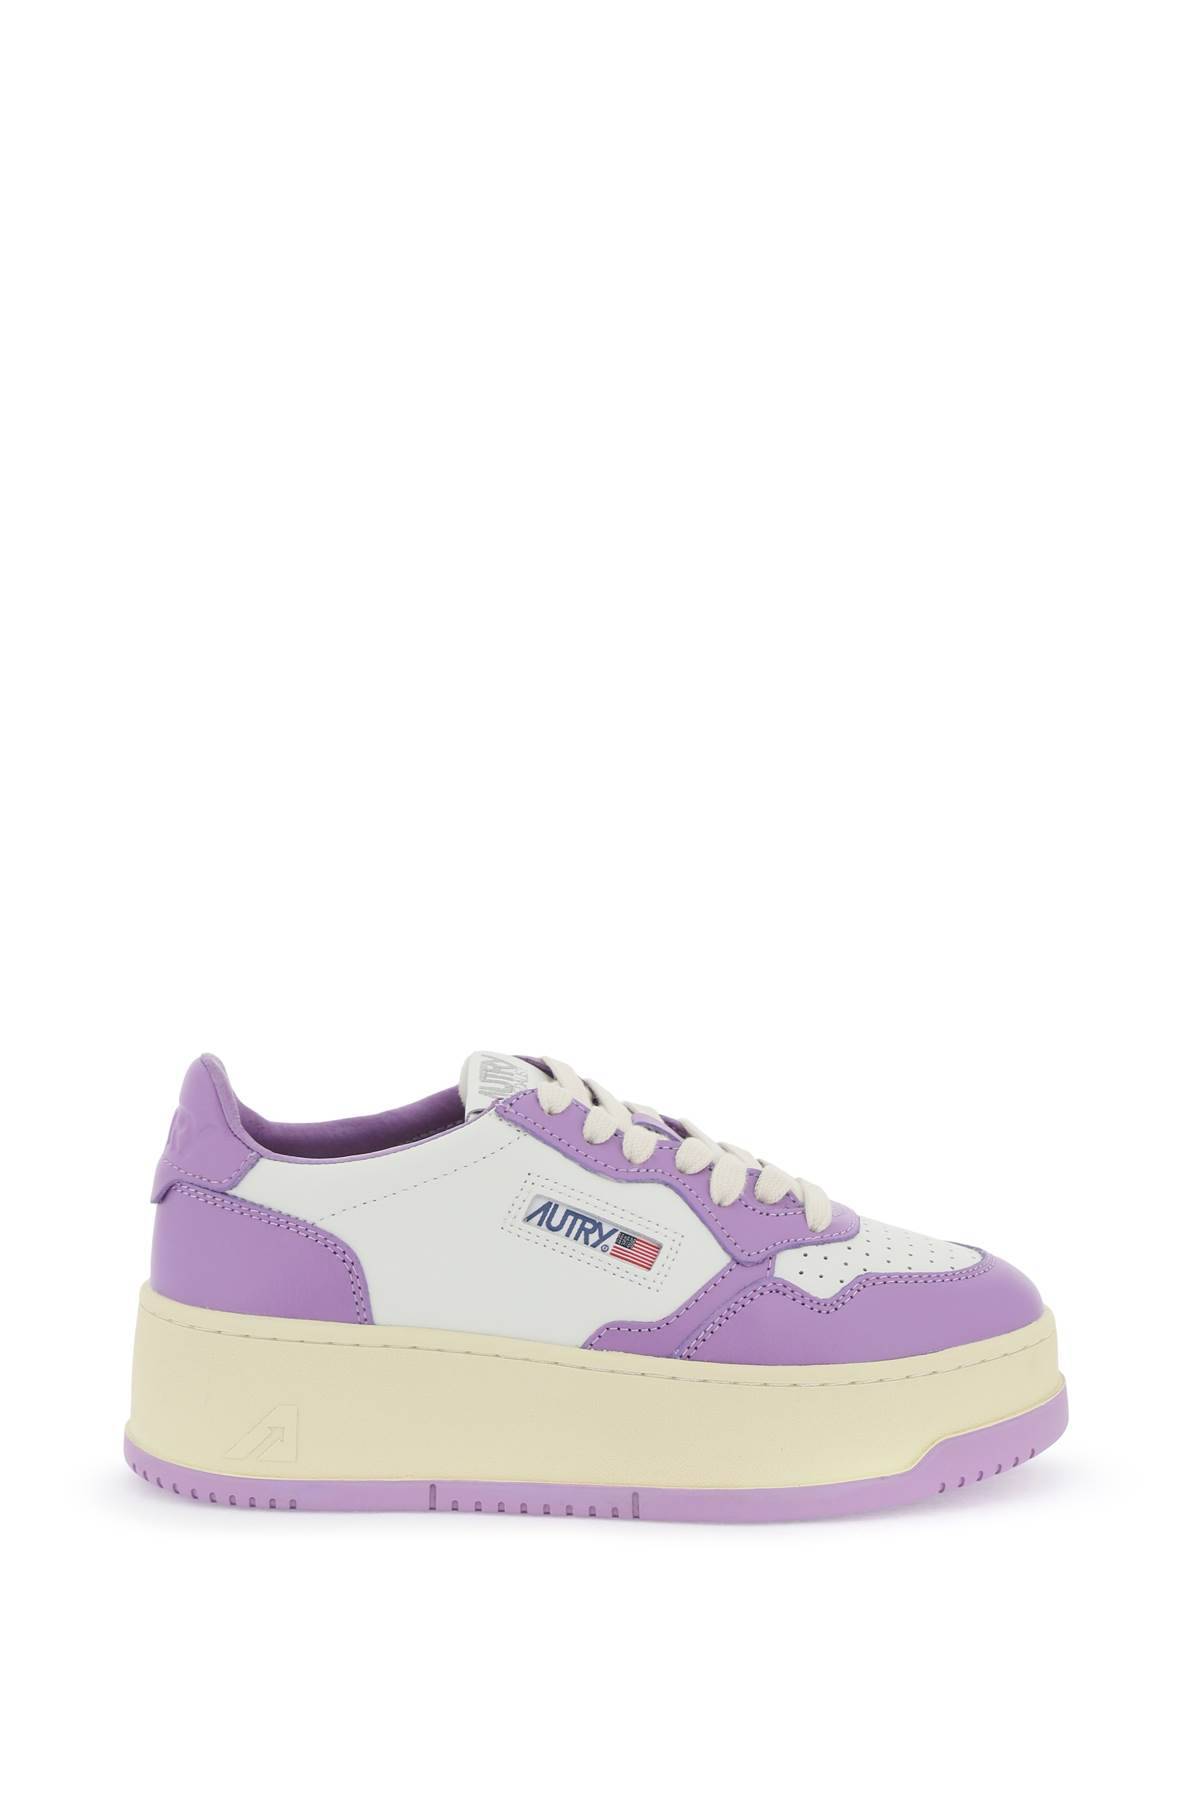 AUTRY AUTRY medalist low sneakers